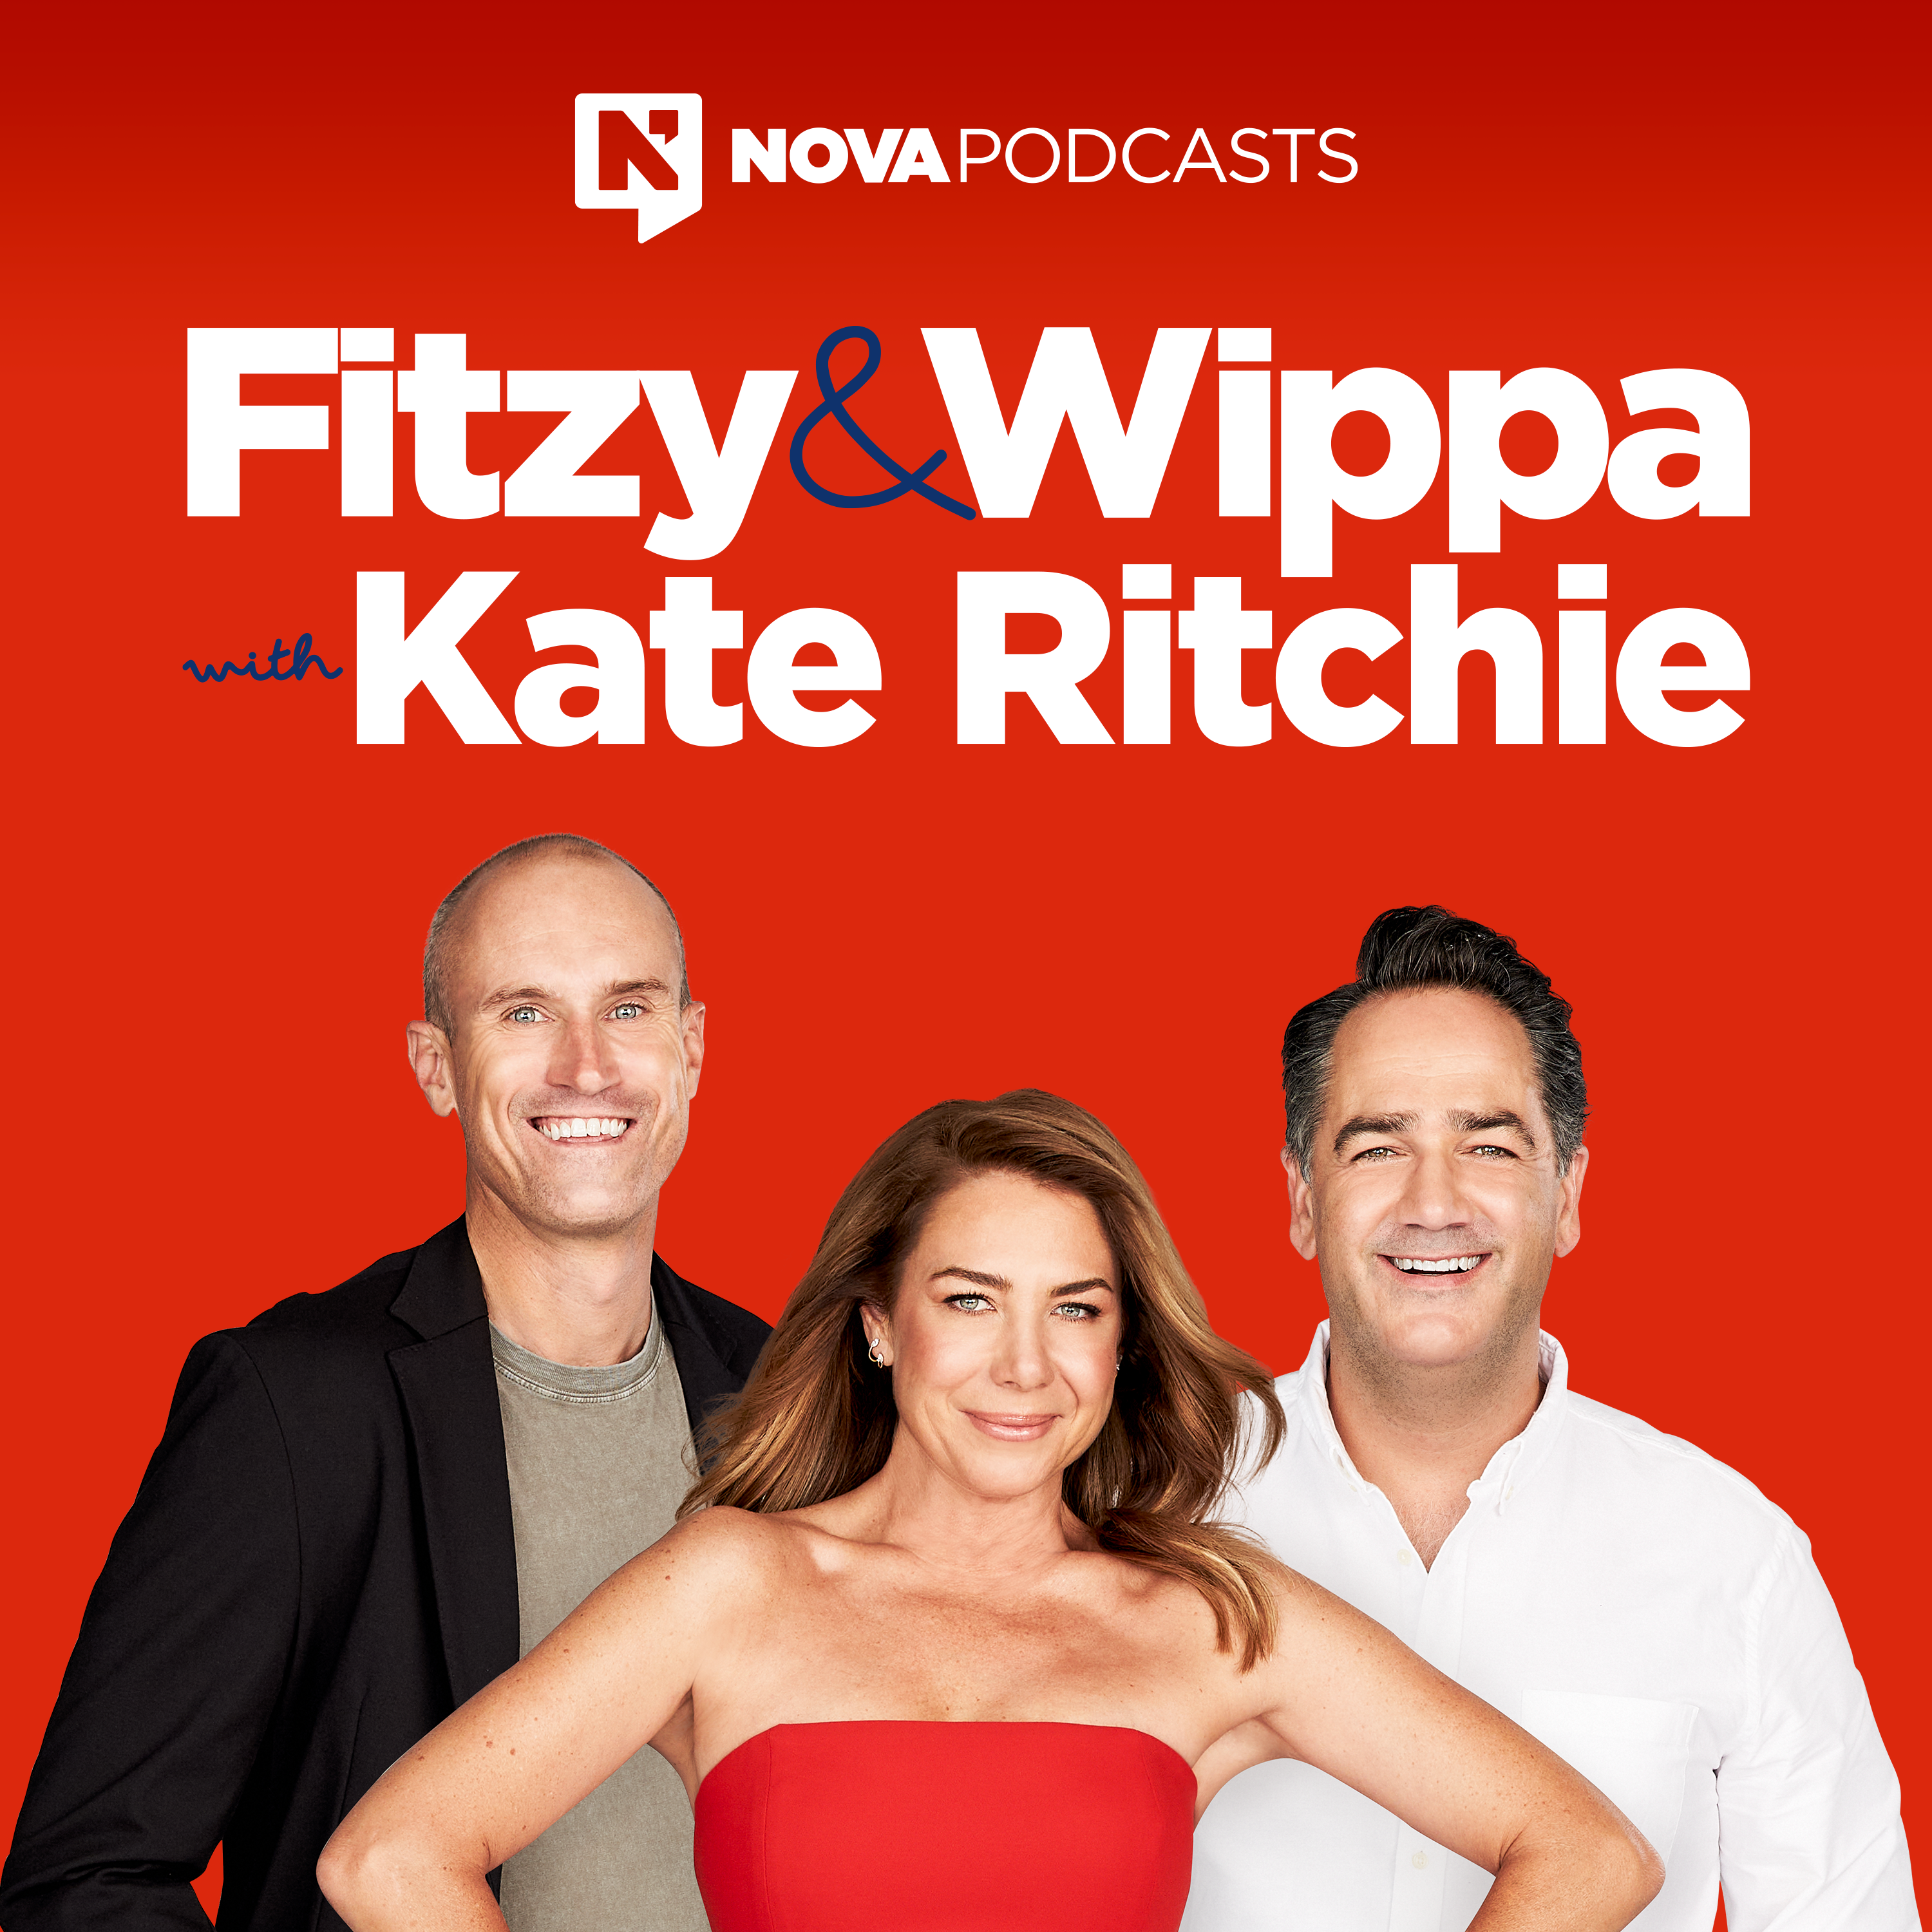 CATCH UP – Fitzy & Wippa Stitch Up Their Family Members For April Fools